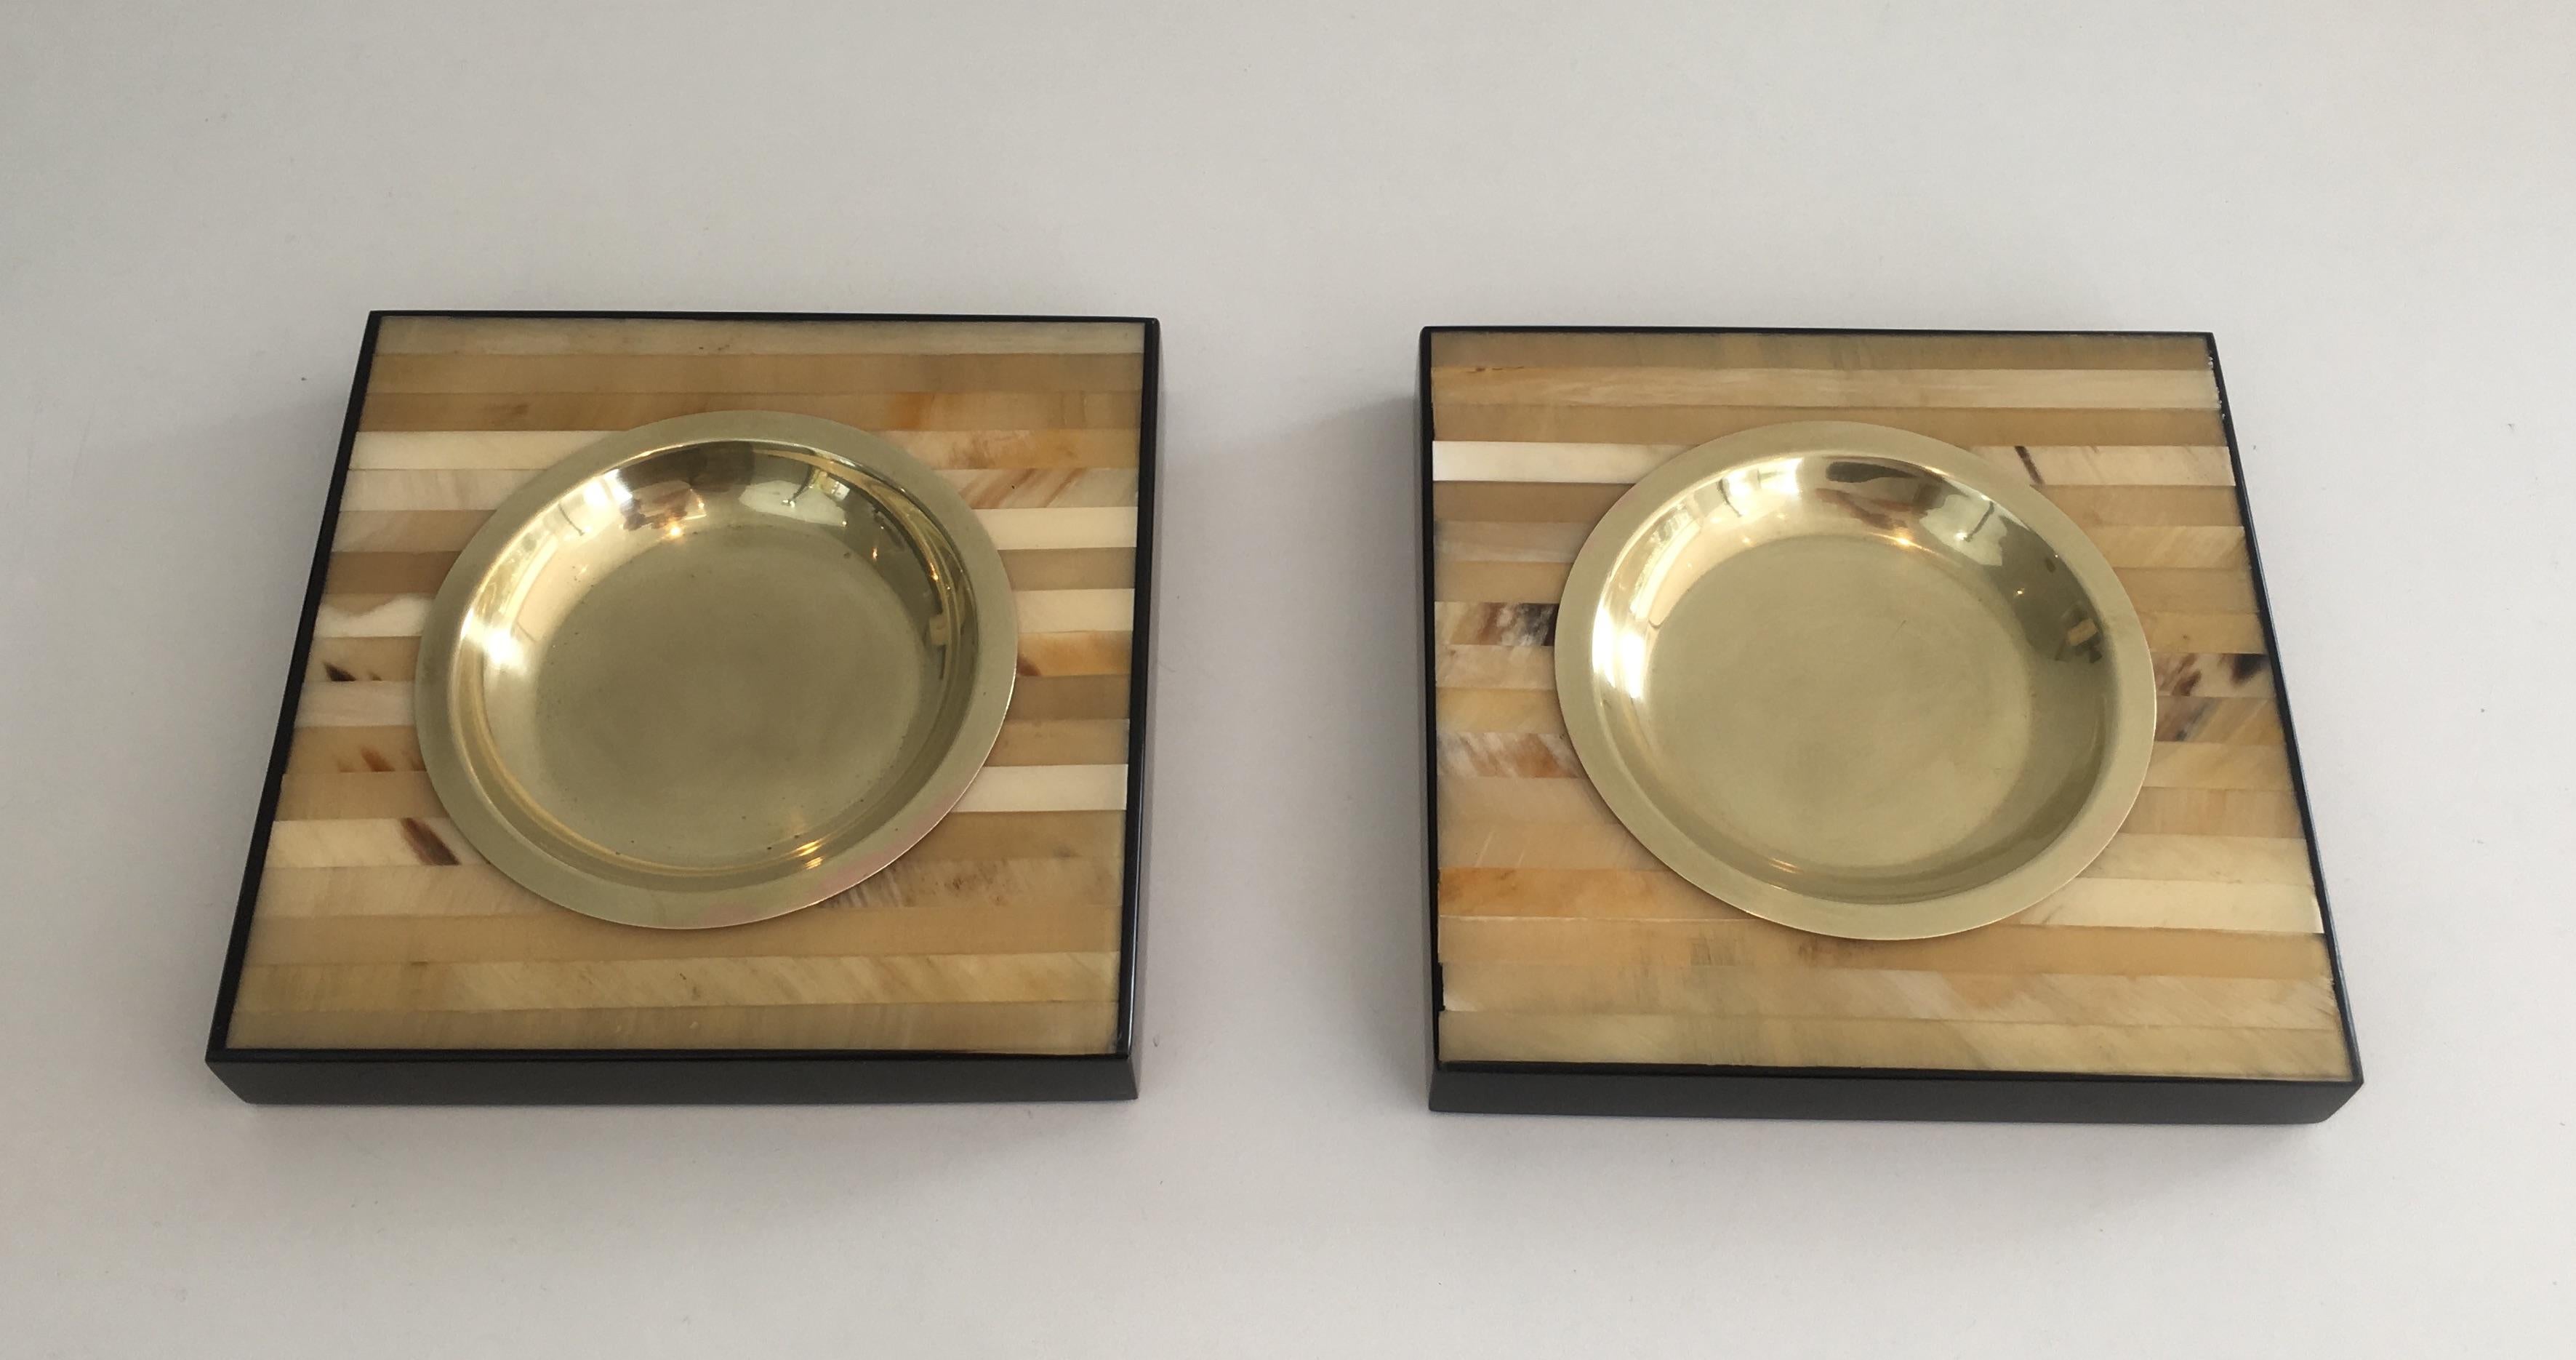 This pair of ashtrays or vide-poches are made of wood and brass They are from Italy and one of them has a sticker showing this is an Italian piece. These are circa 1970 and are sold individually.